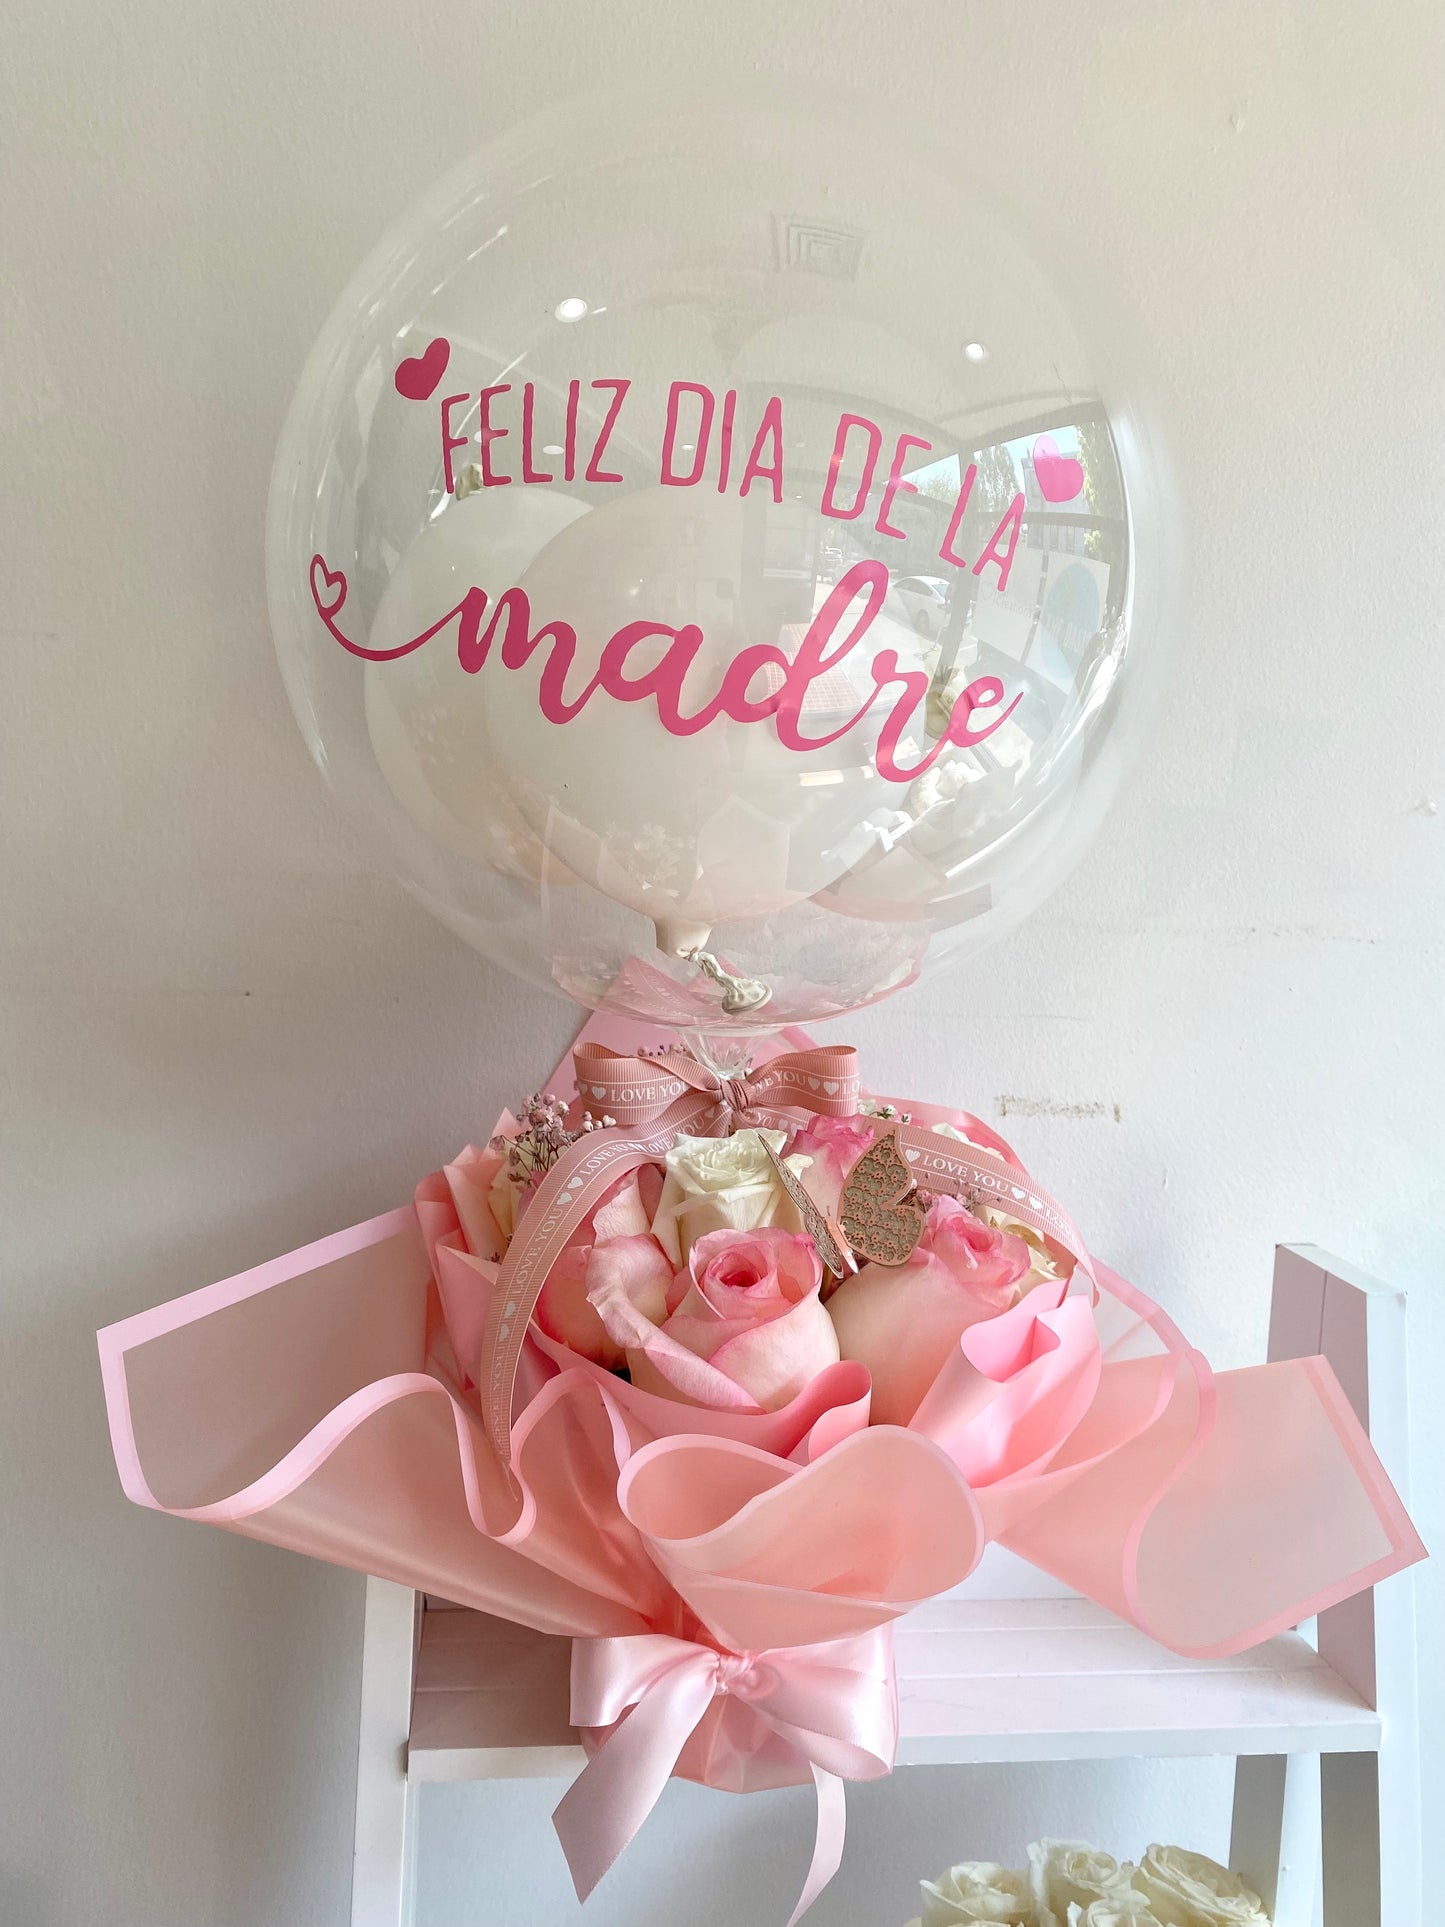 Small Floral arrangement with personalized balloon